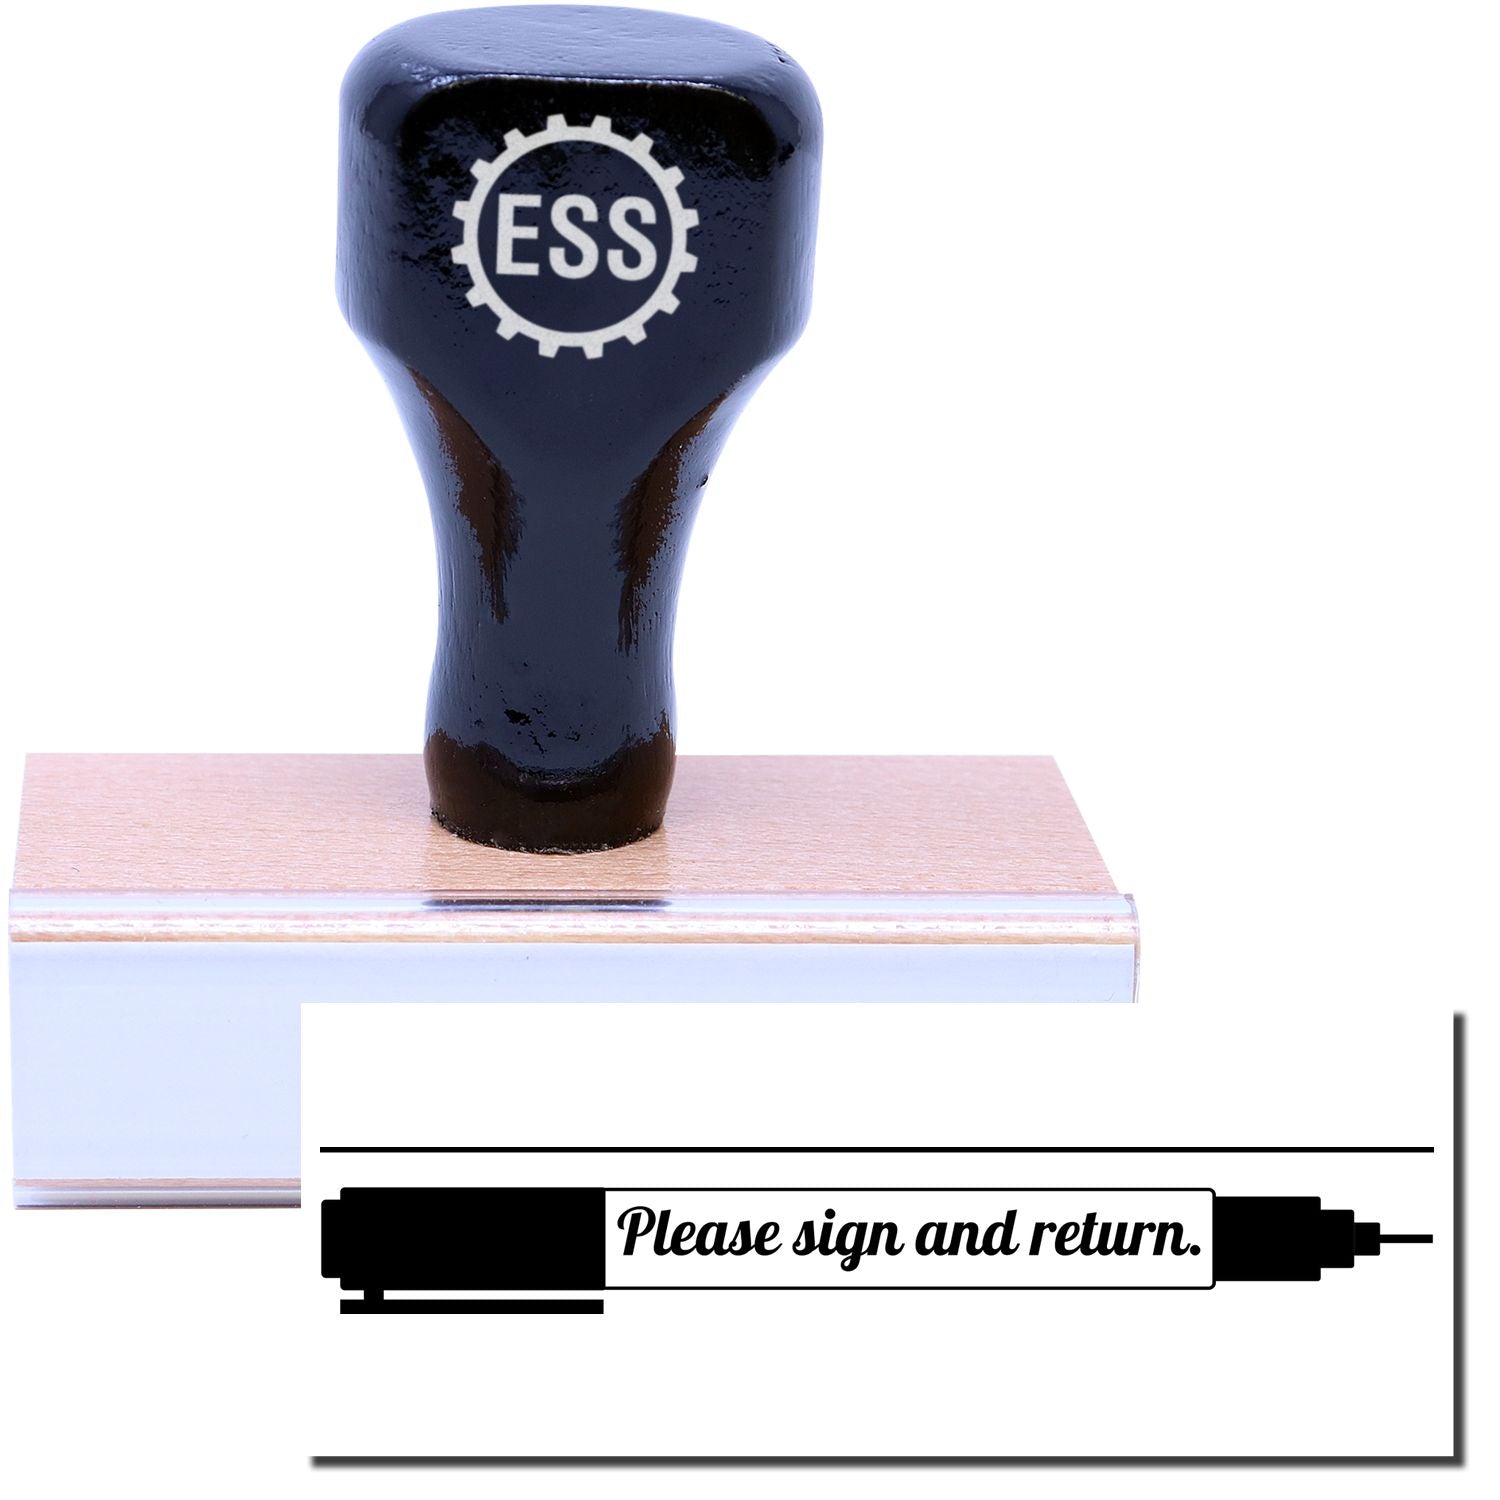 A stock office rubber stamp with a stamped image showing how the text "Please sign and return." in a cursive font with an image of a pen is displayed after stamping.